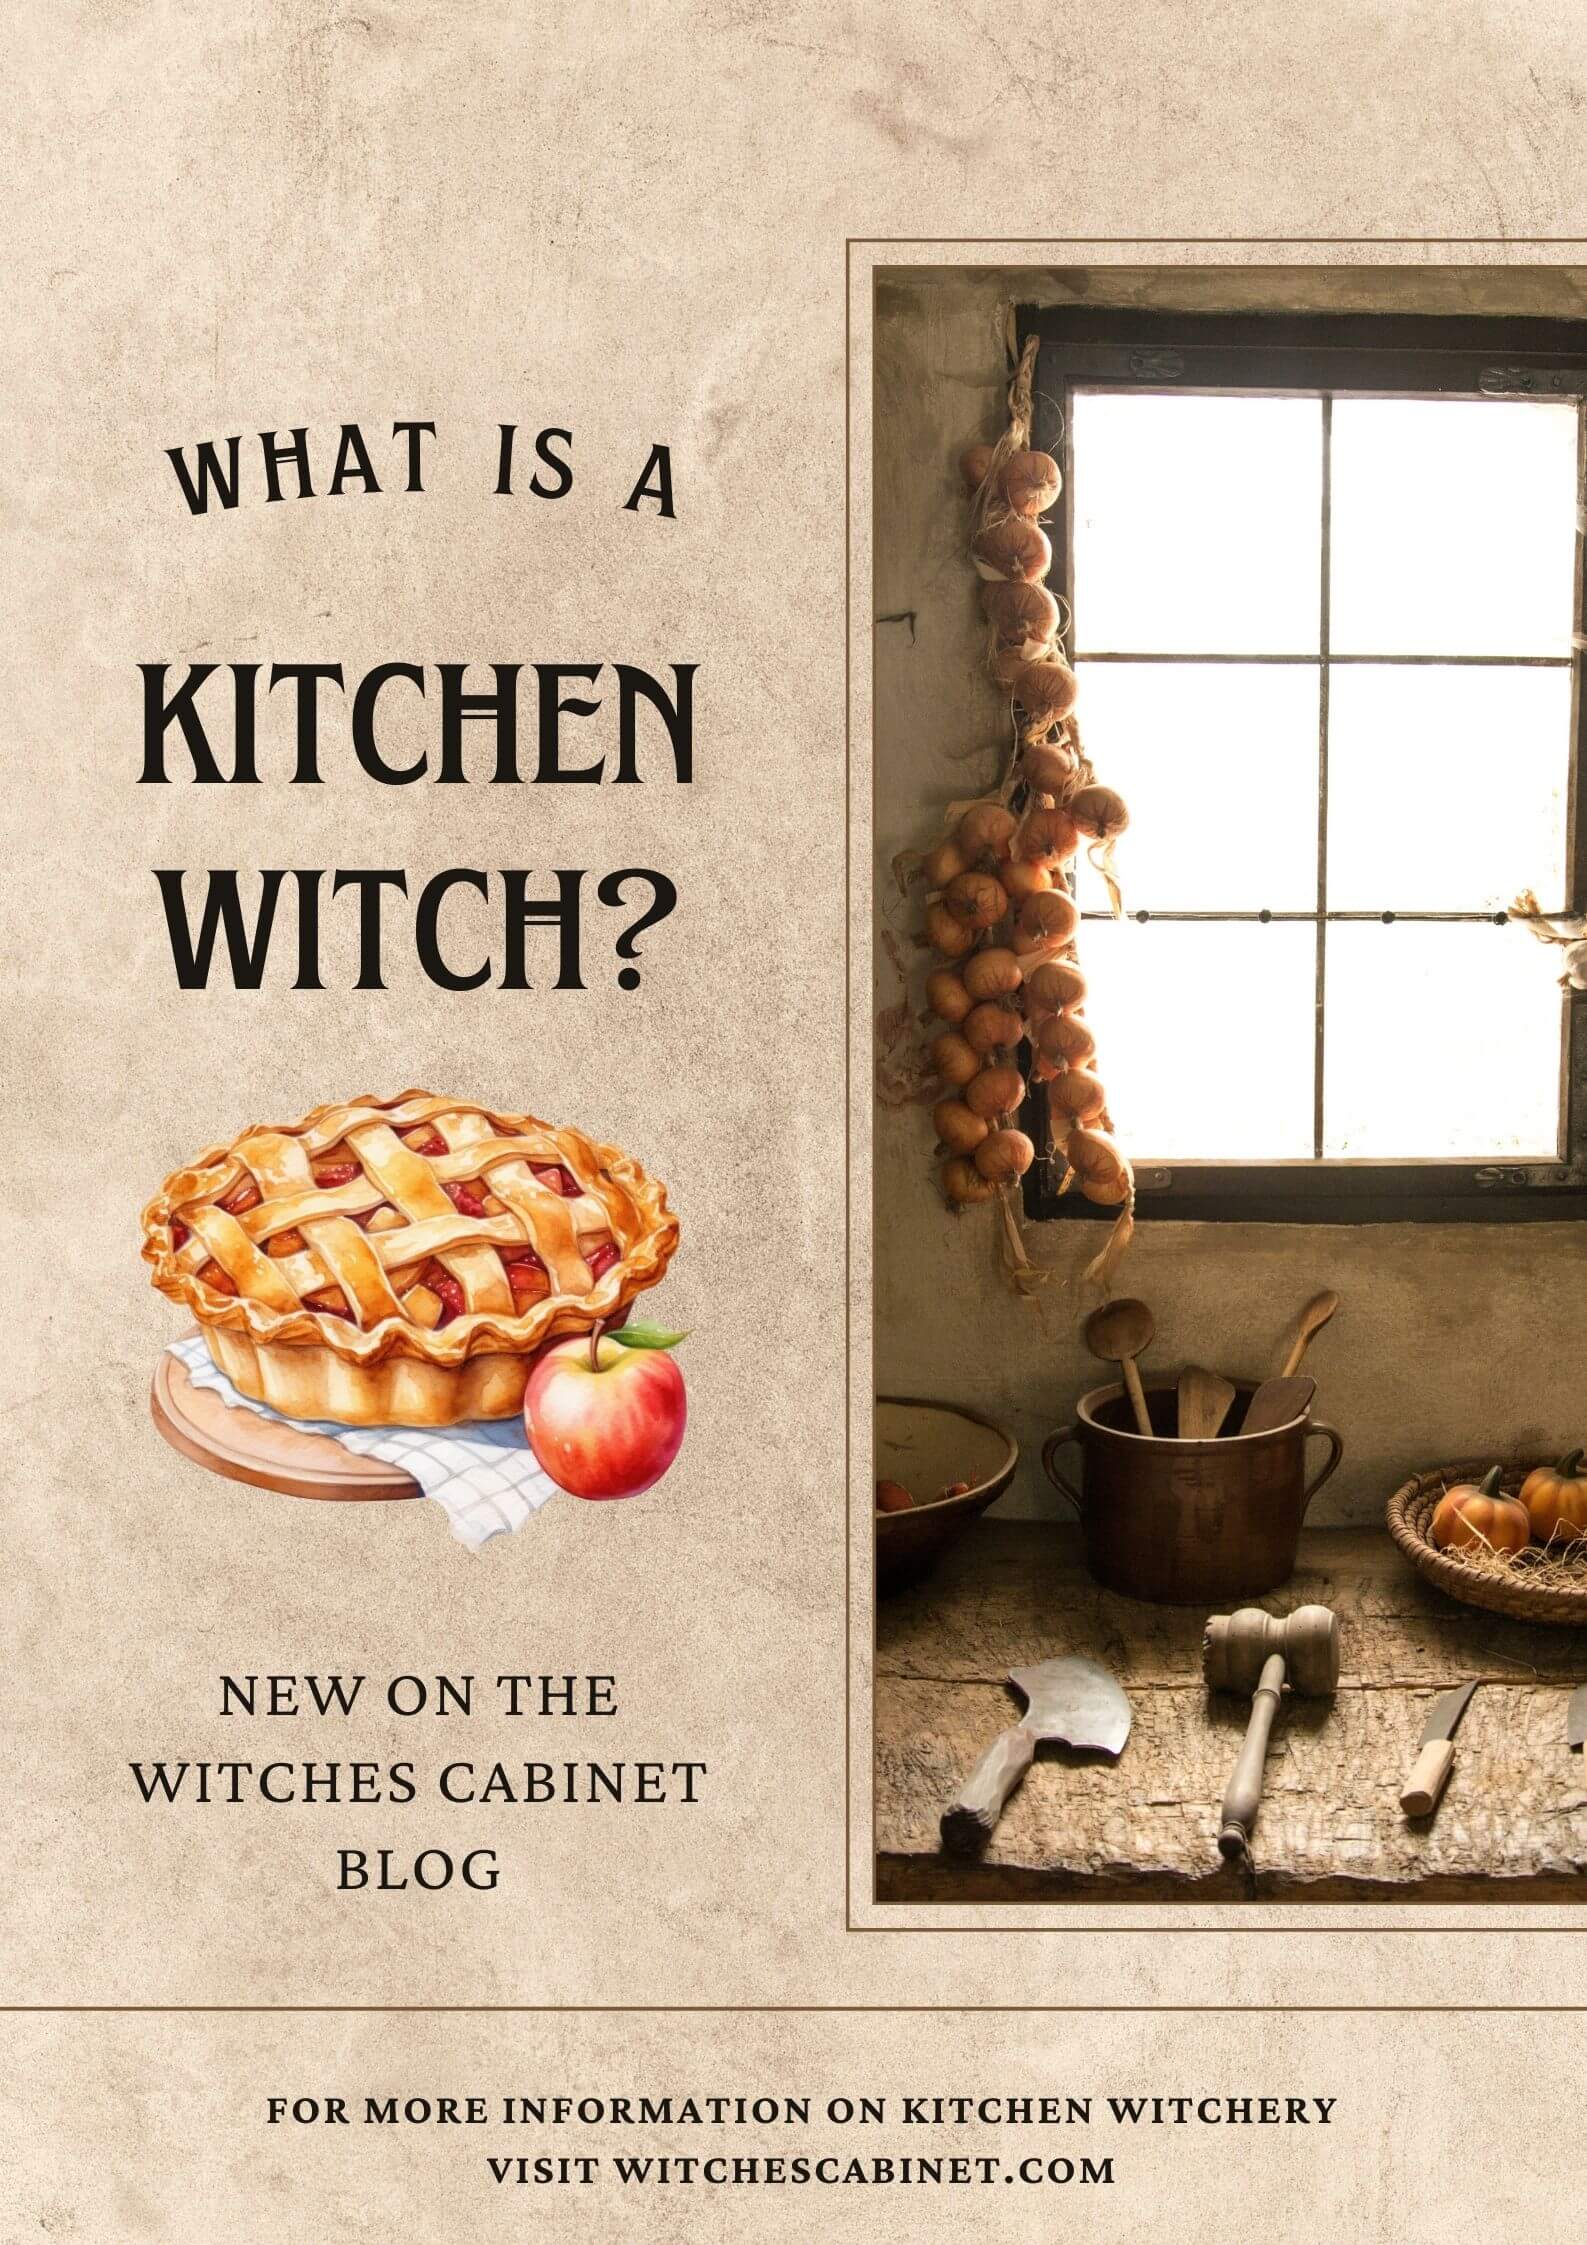 What is a kitchen witch?